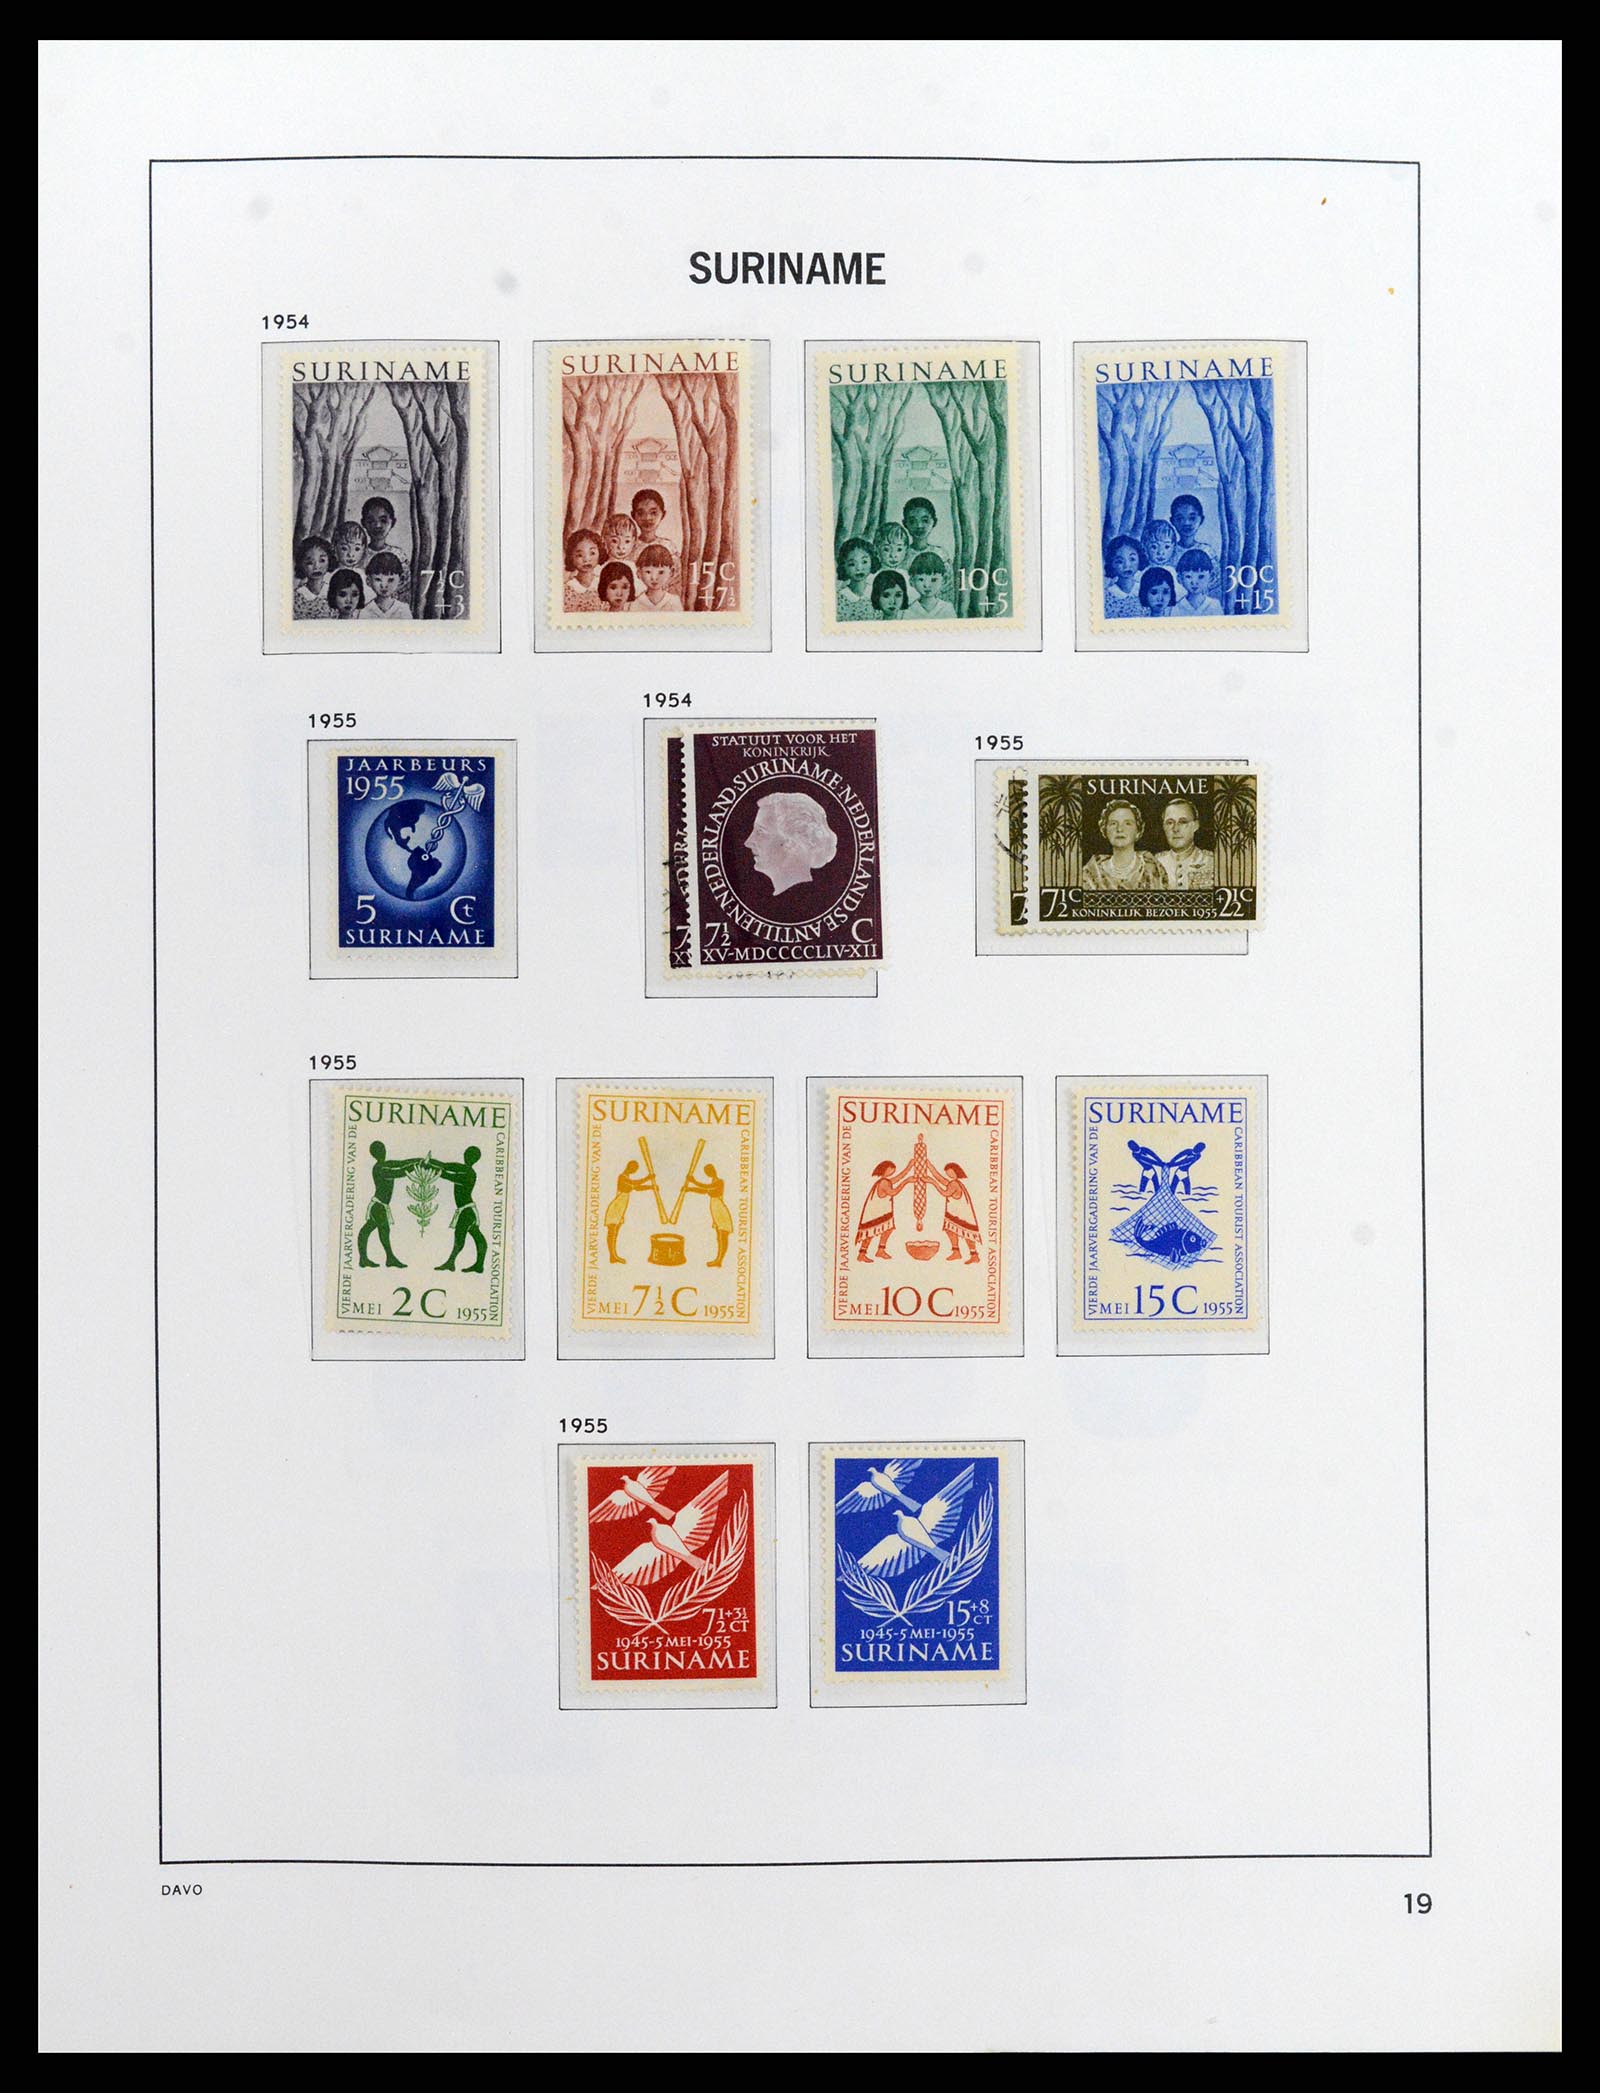 37843 020 - Stamp Collection 37843 Suriname 1873-2008.